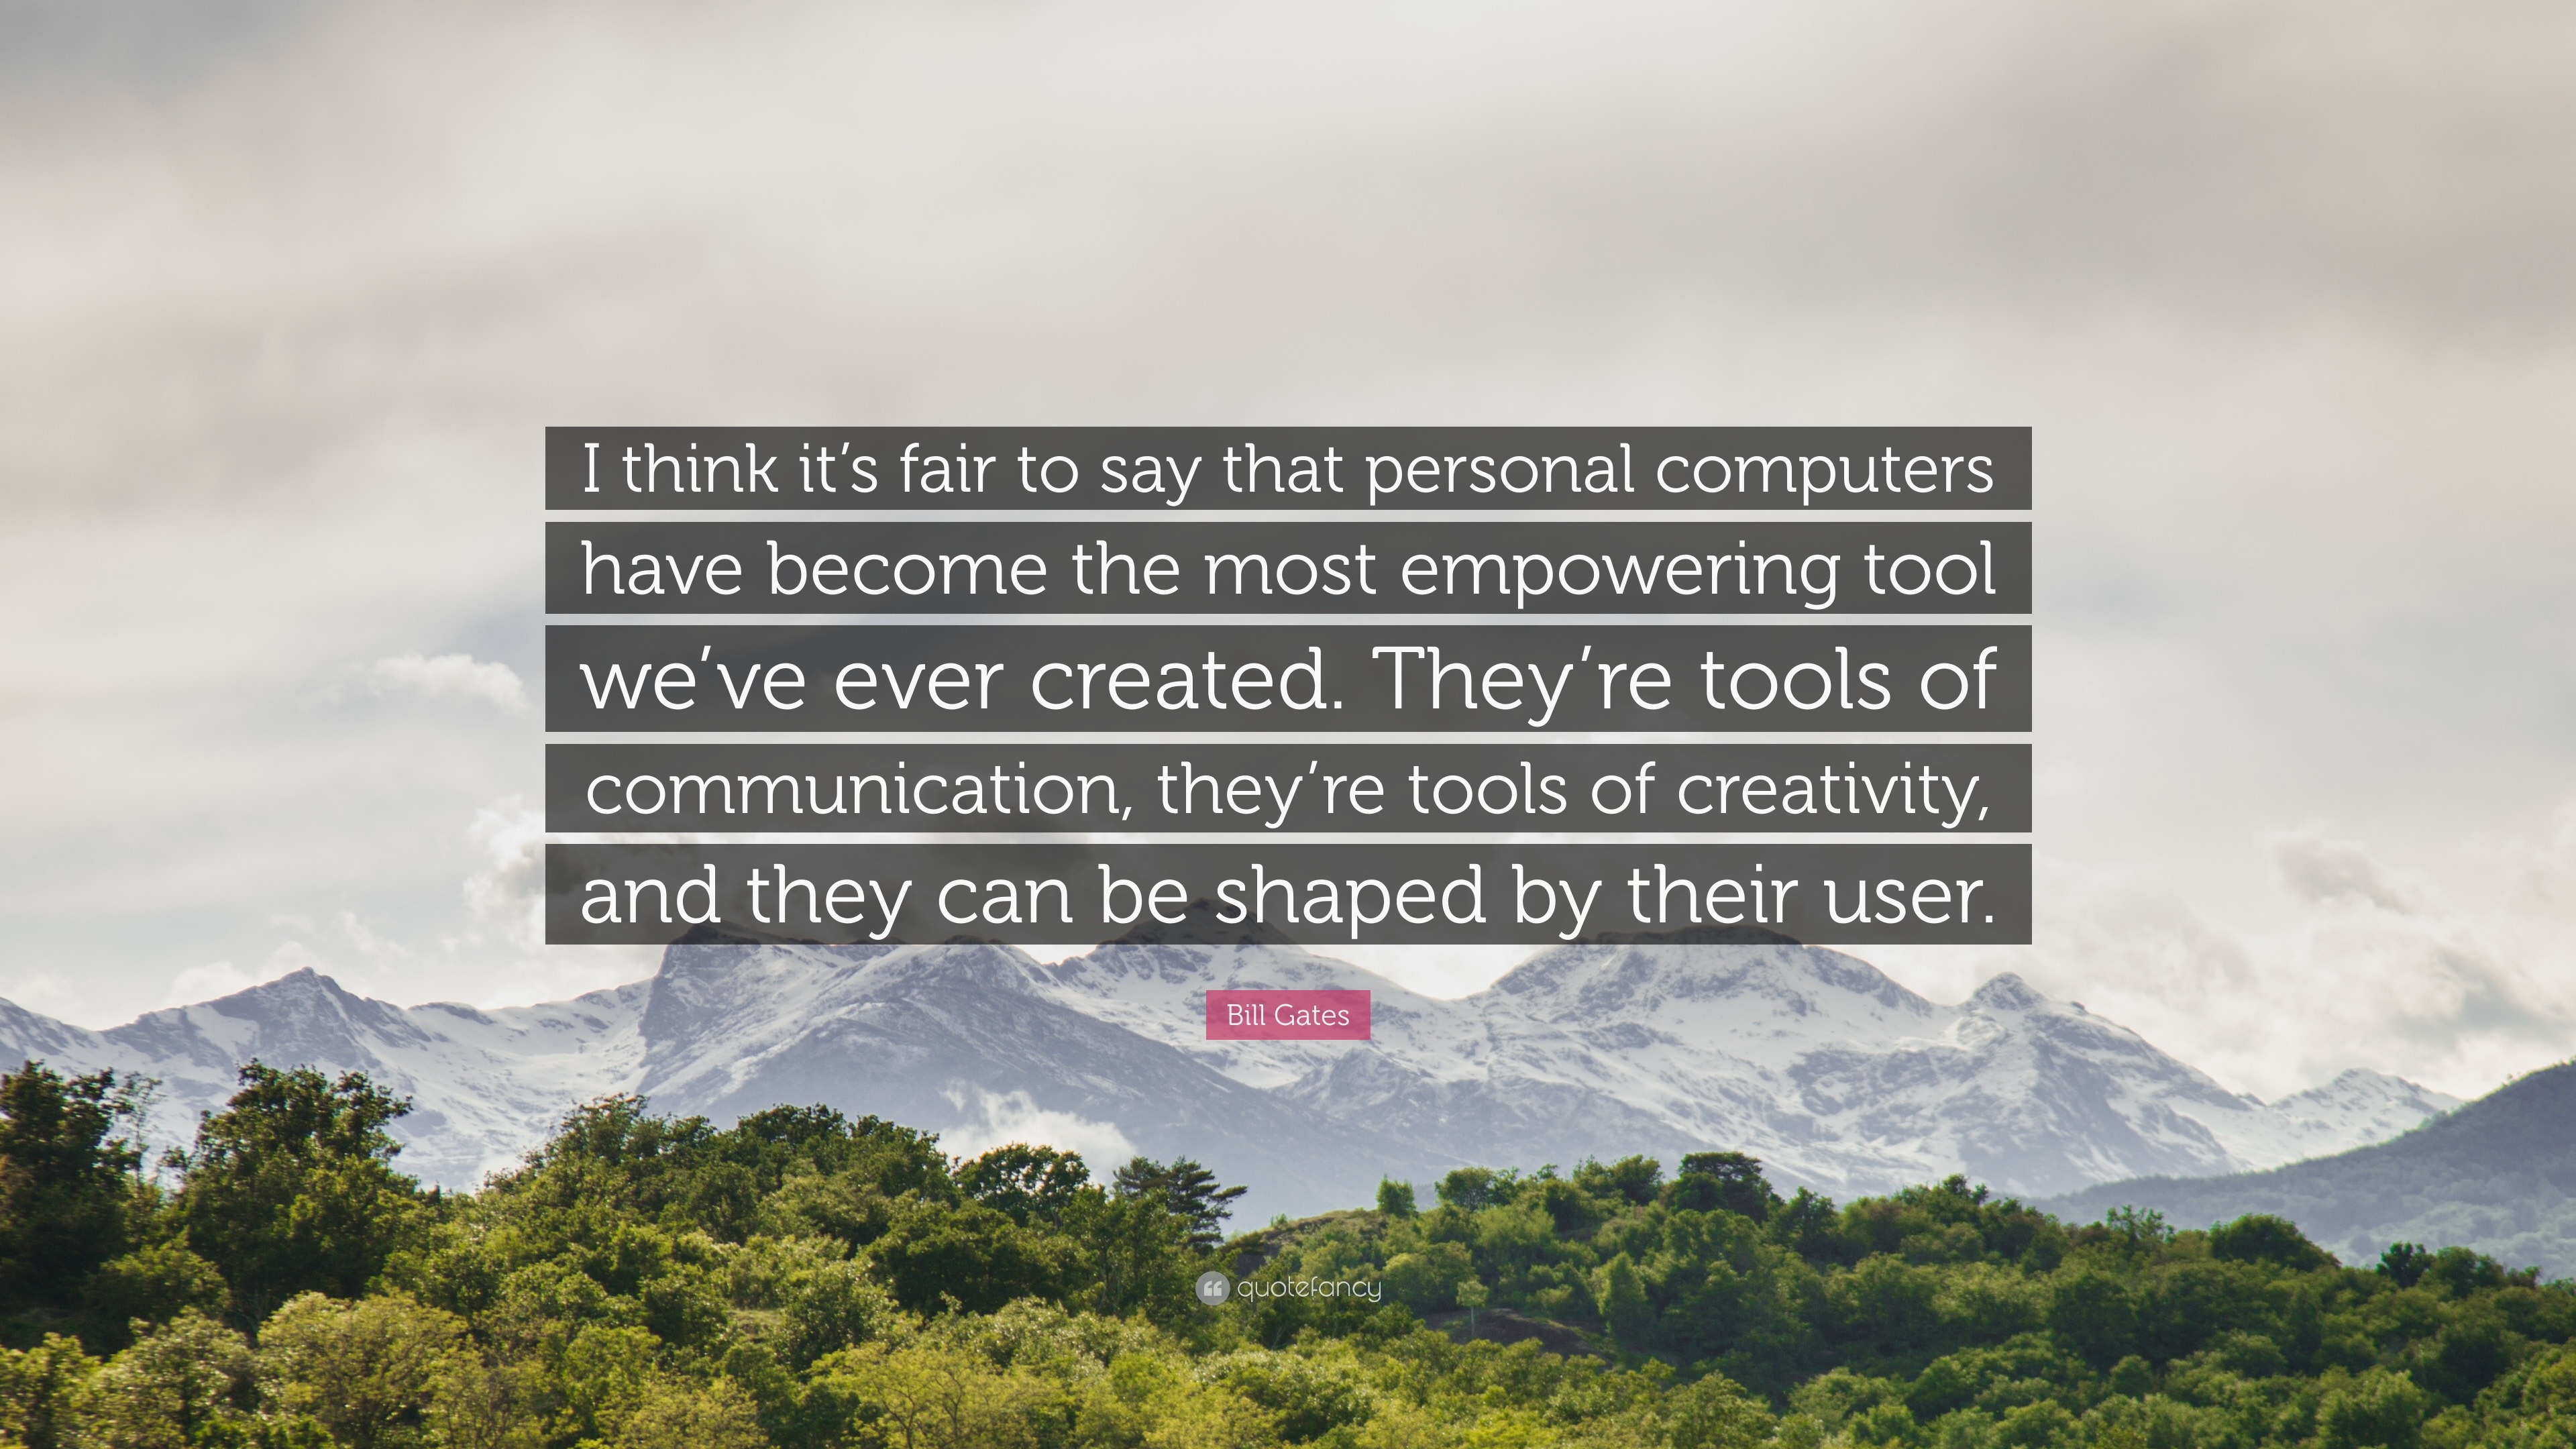 Bill Gates Quote: “I think it&#39;s fair to say that personal computers have  become the most empowering tool we&#39;ve ever created. They&#39;re tools ...”